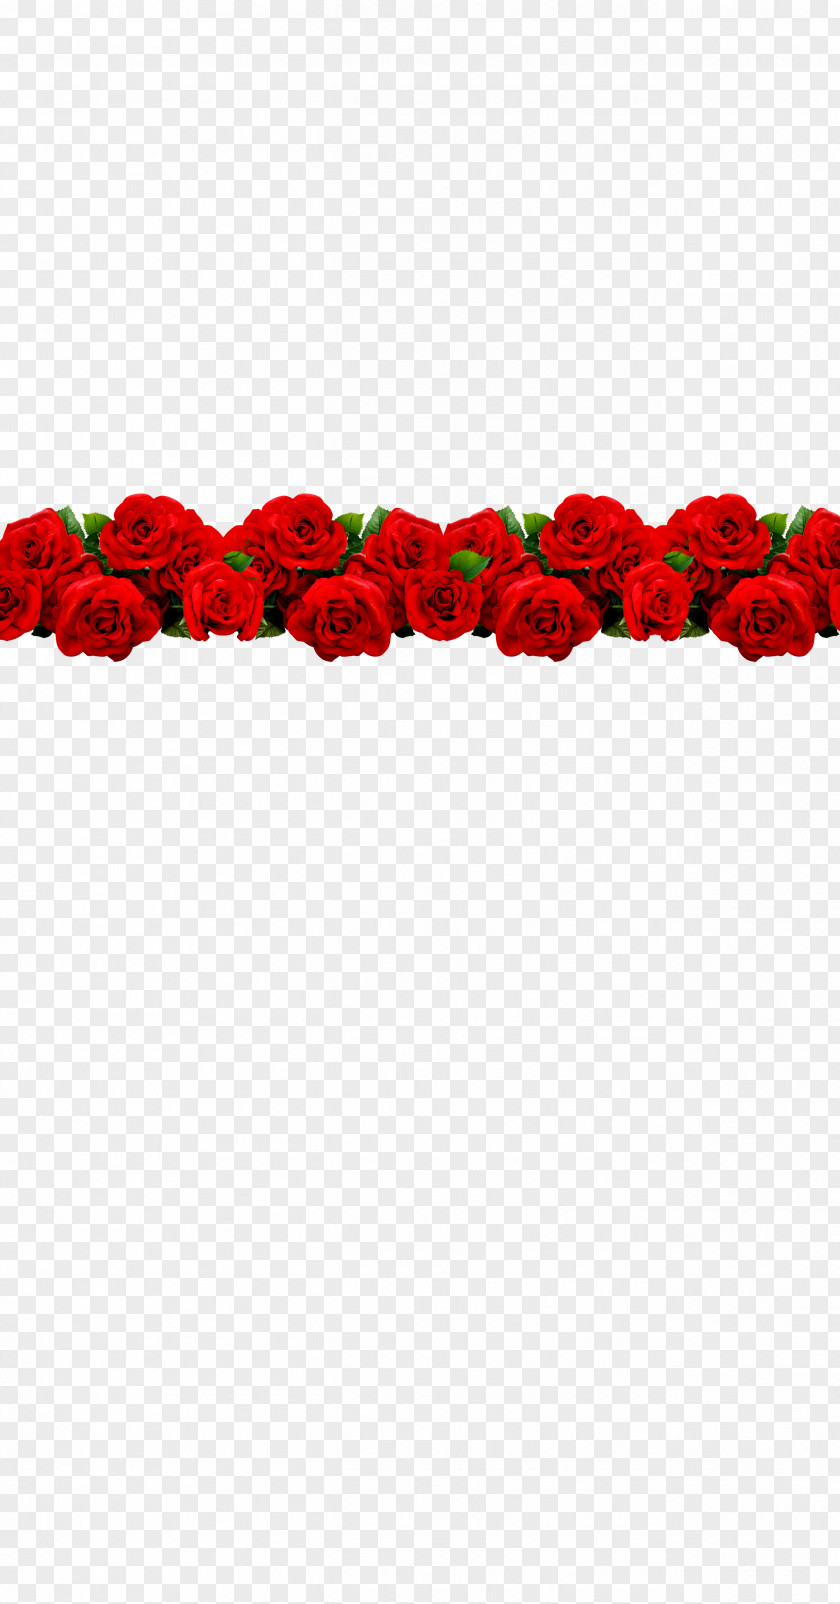 Roses, Red, Romantic, Valentine's Day Textile Petal Pattern PNG